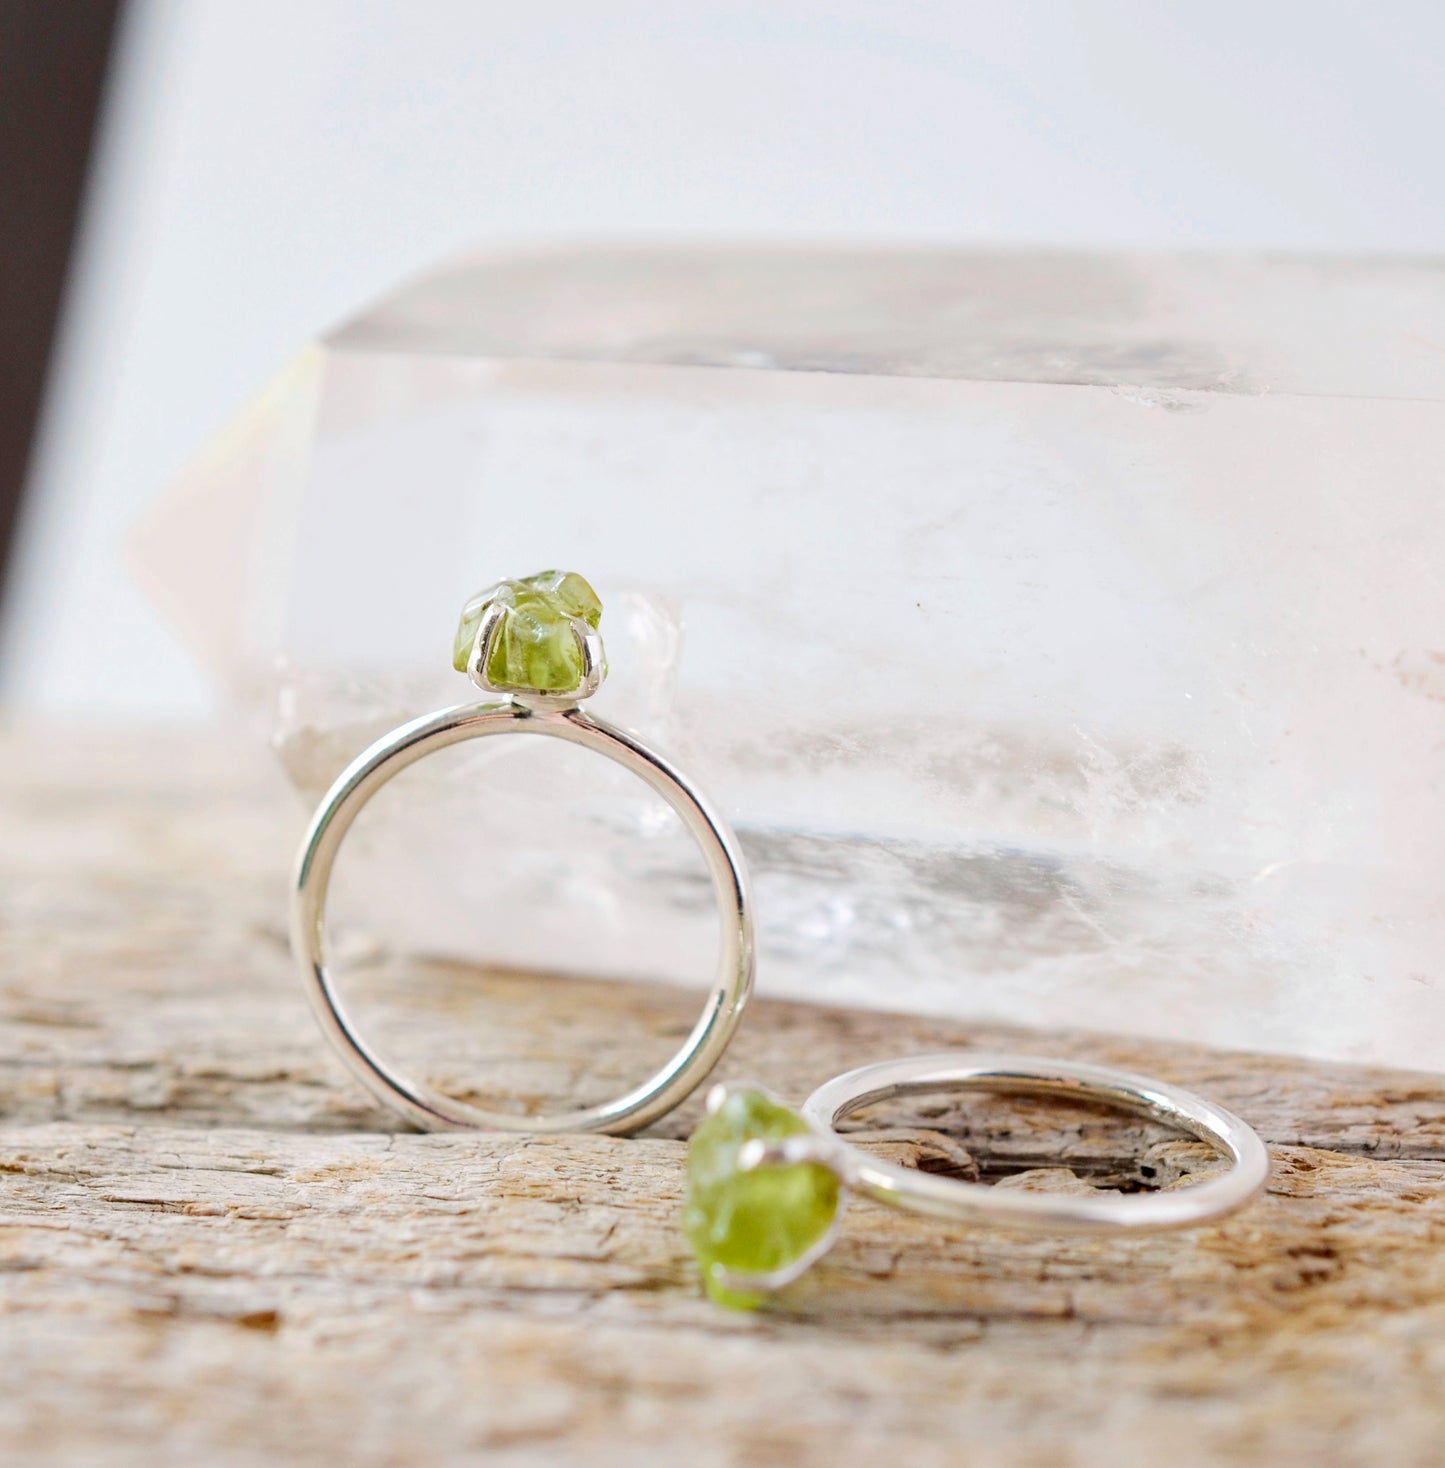 Raw green peridot ring on a sterling silver band. Close up image.